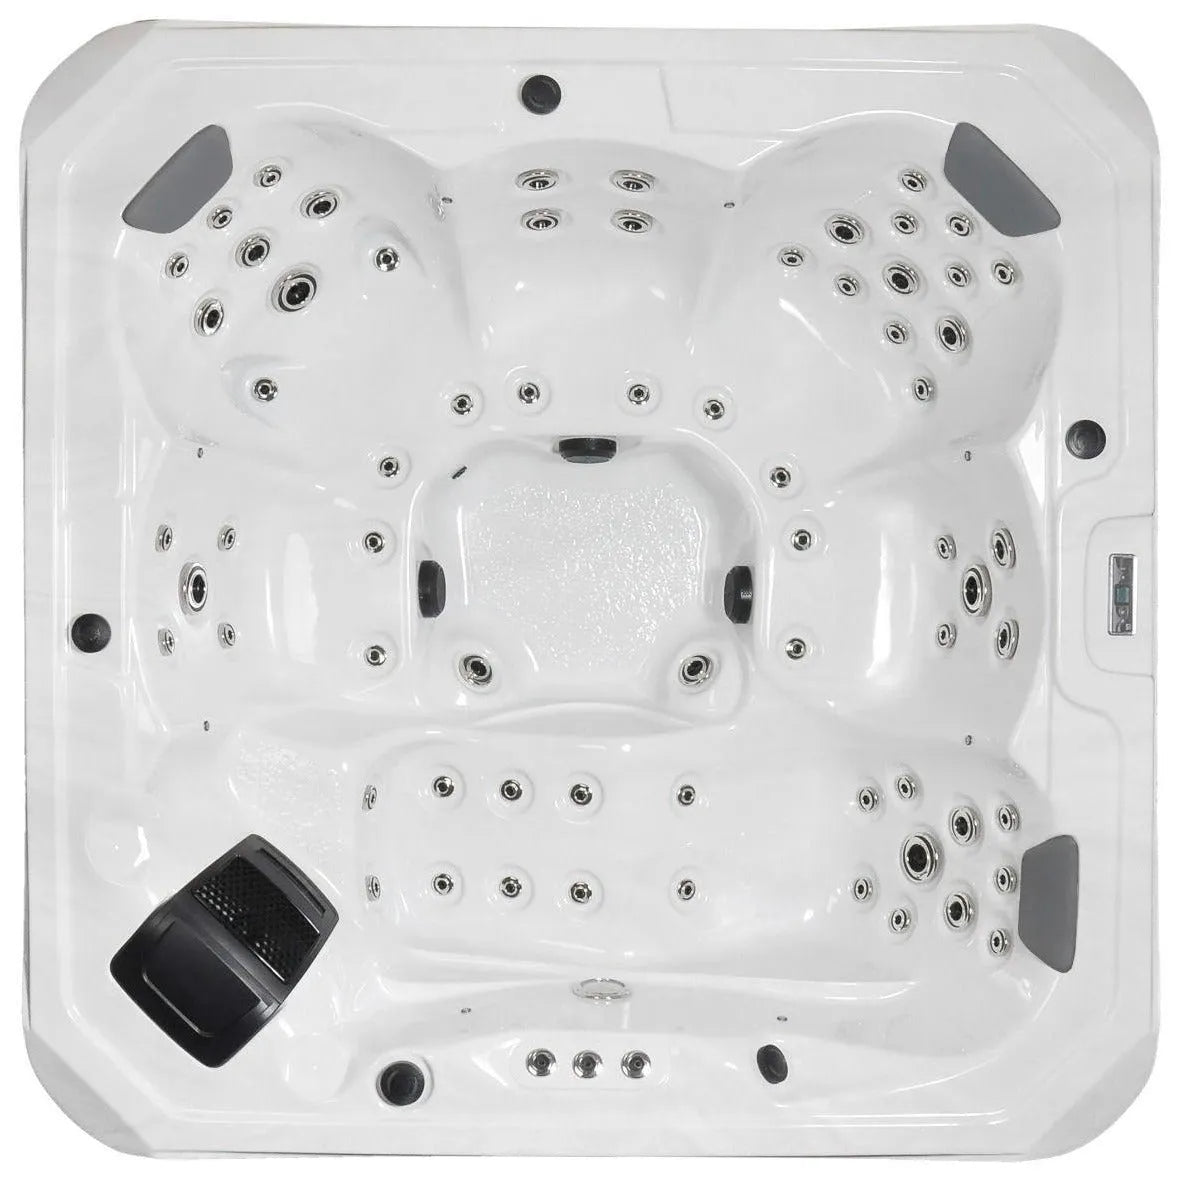 A top-down view of the Hot Tub Liverpool Dakota - 6 Person Hot Tub reveals a rectangular design with multiple built-in seats. The hot tub features stainless steel hydrotherapy jets and padded headrests in some corners, while Gecko Controls are visible on one of the inner sides.